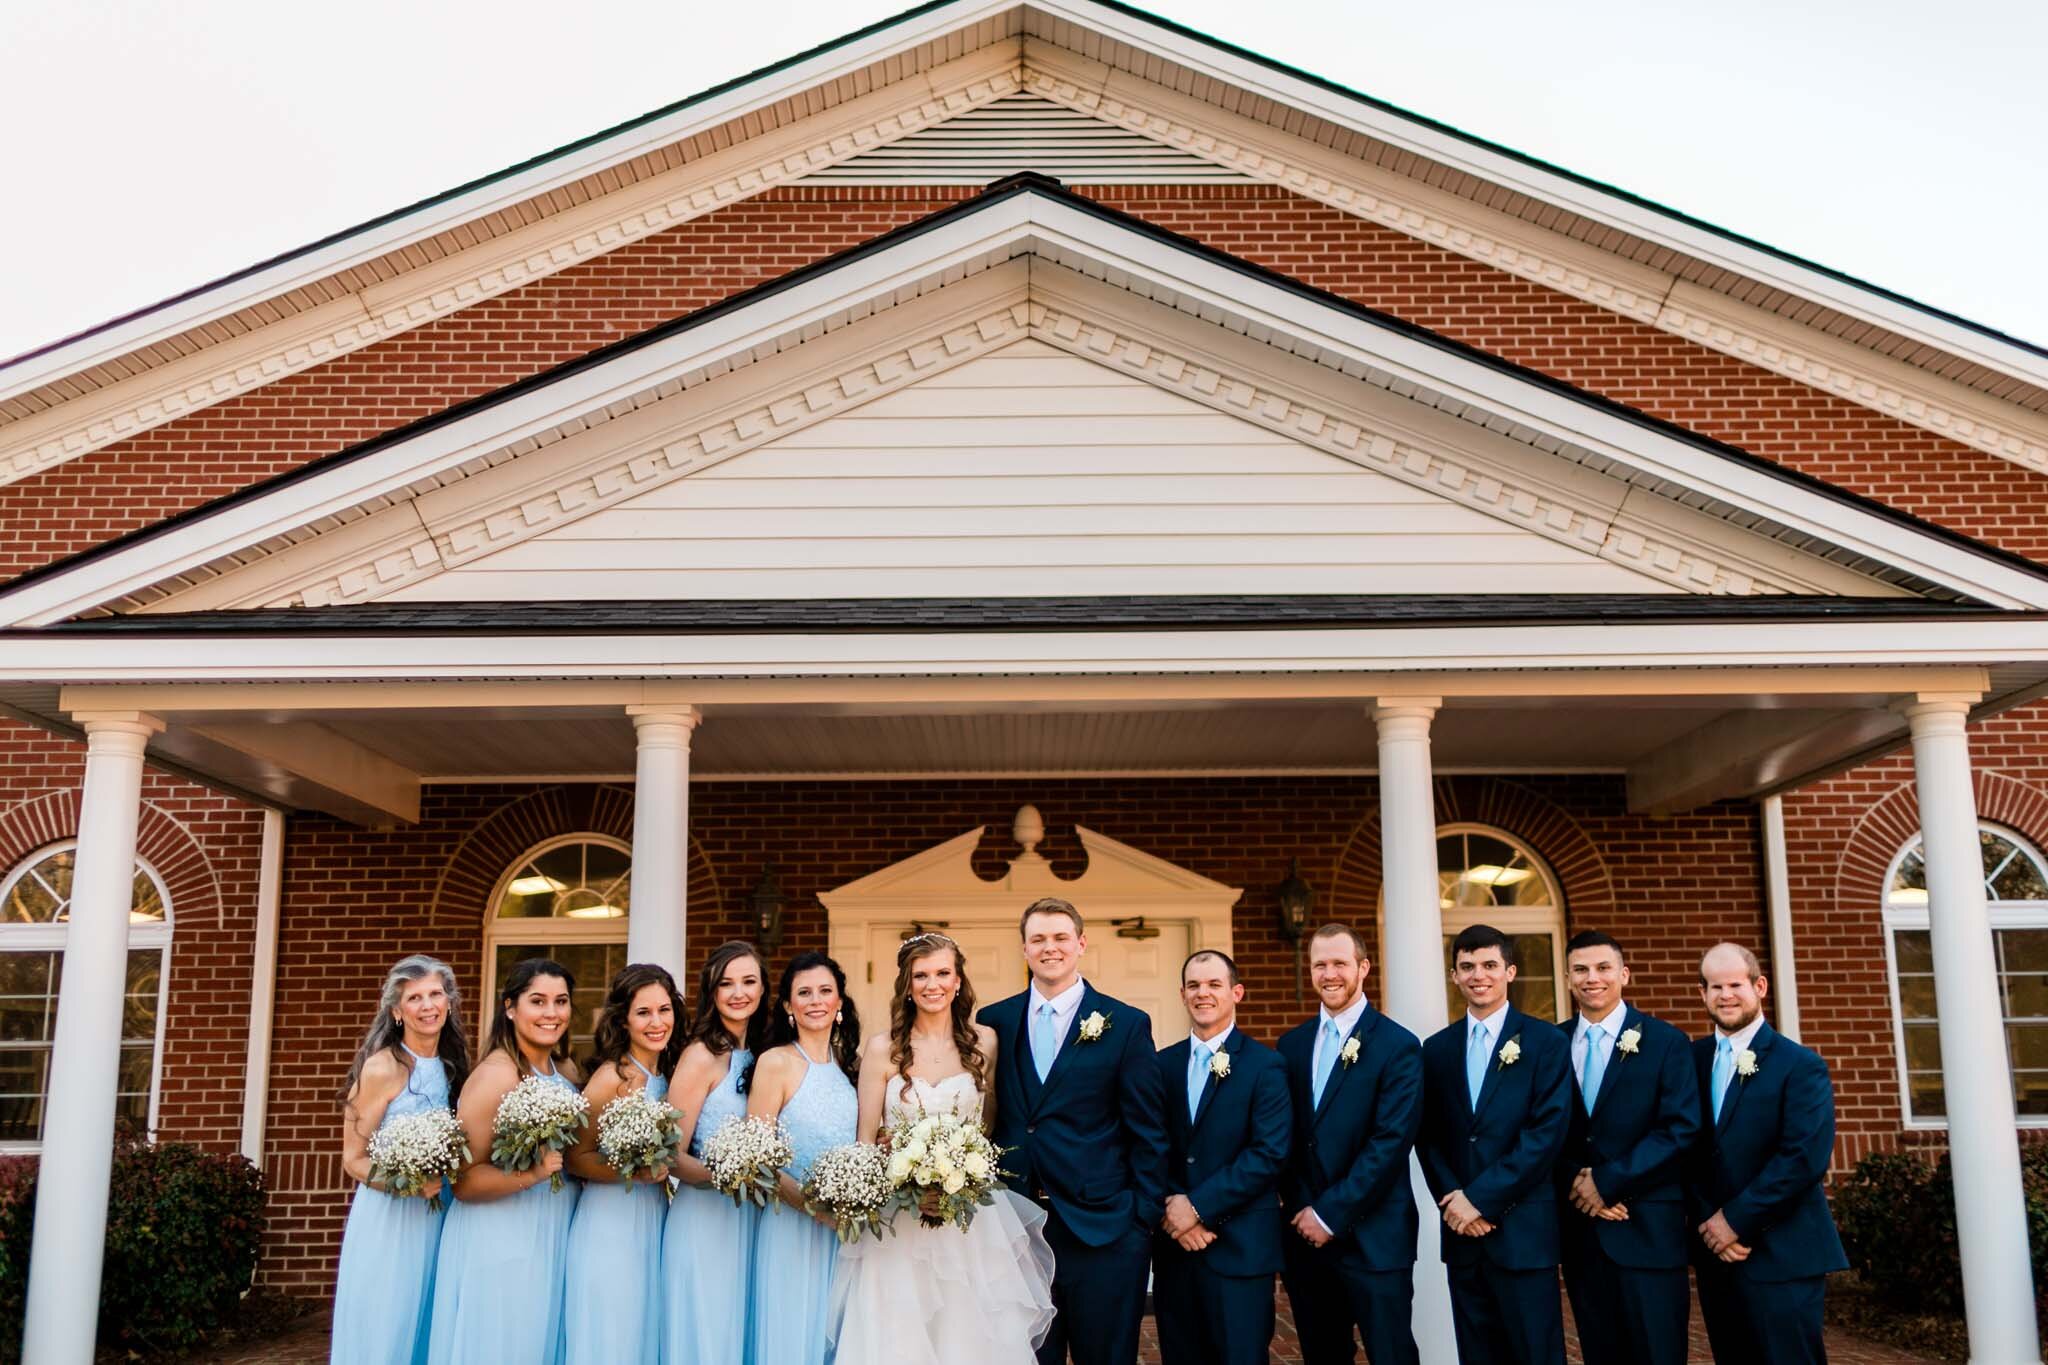 Durham Wedding Photographer | By G. Lin Photography | Beautiful wedding party group photo by church